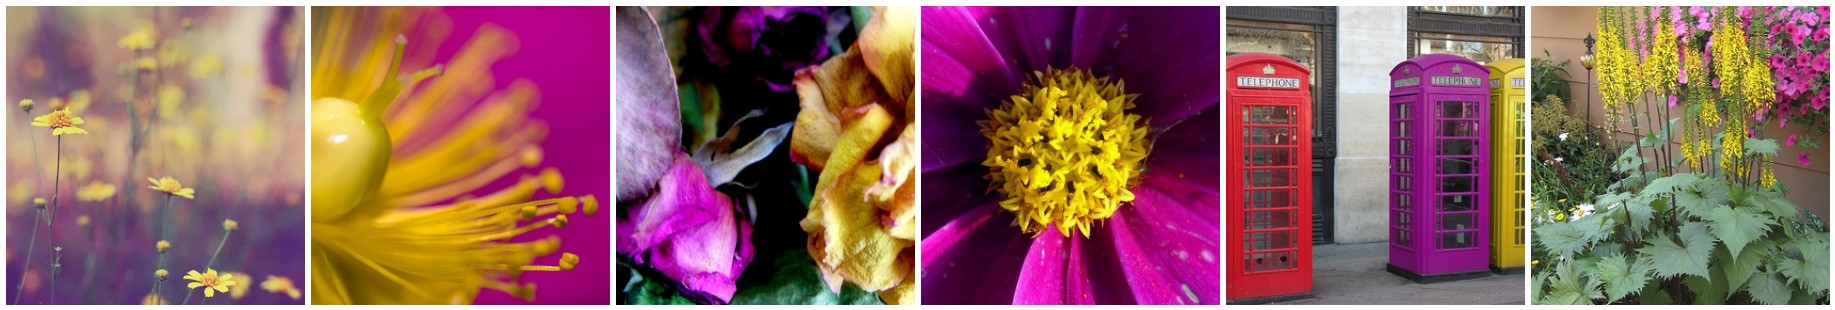 A collage of colorful flowers.